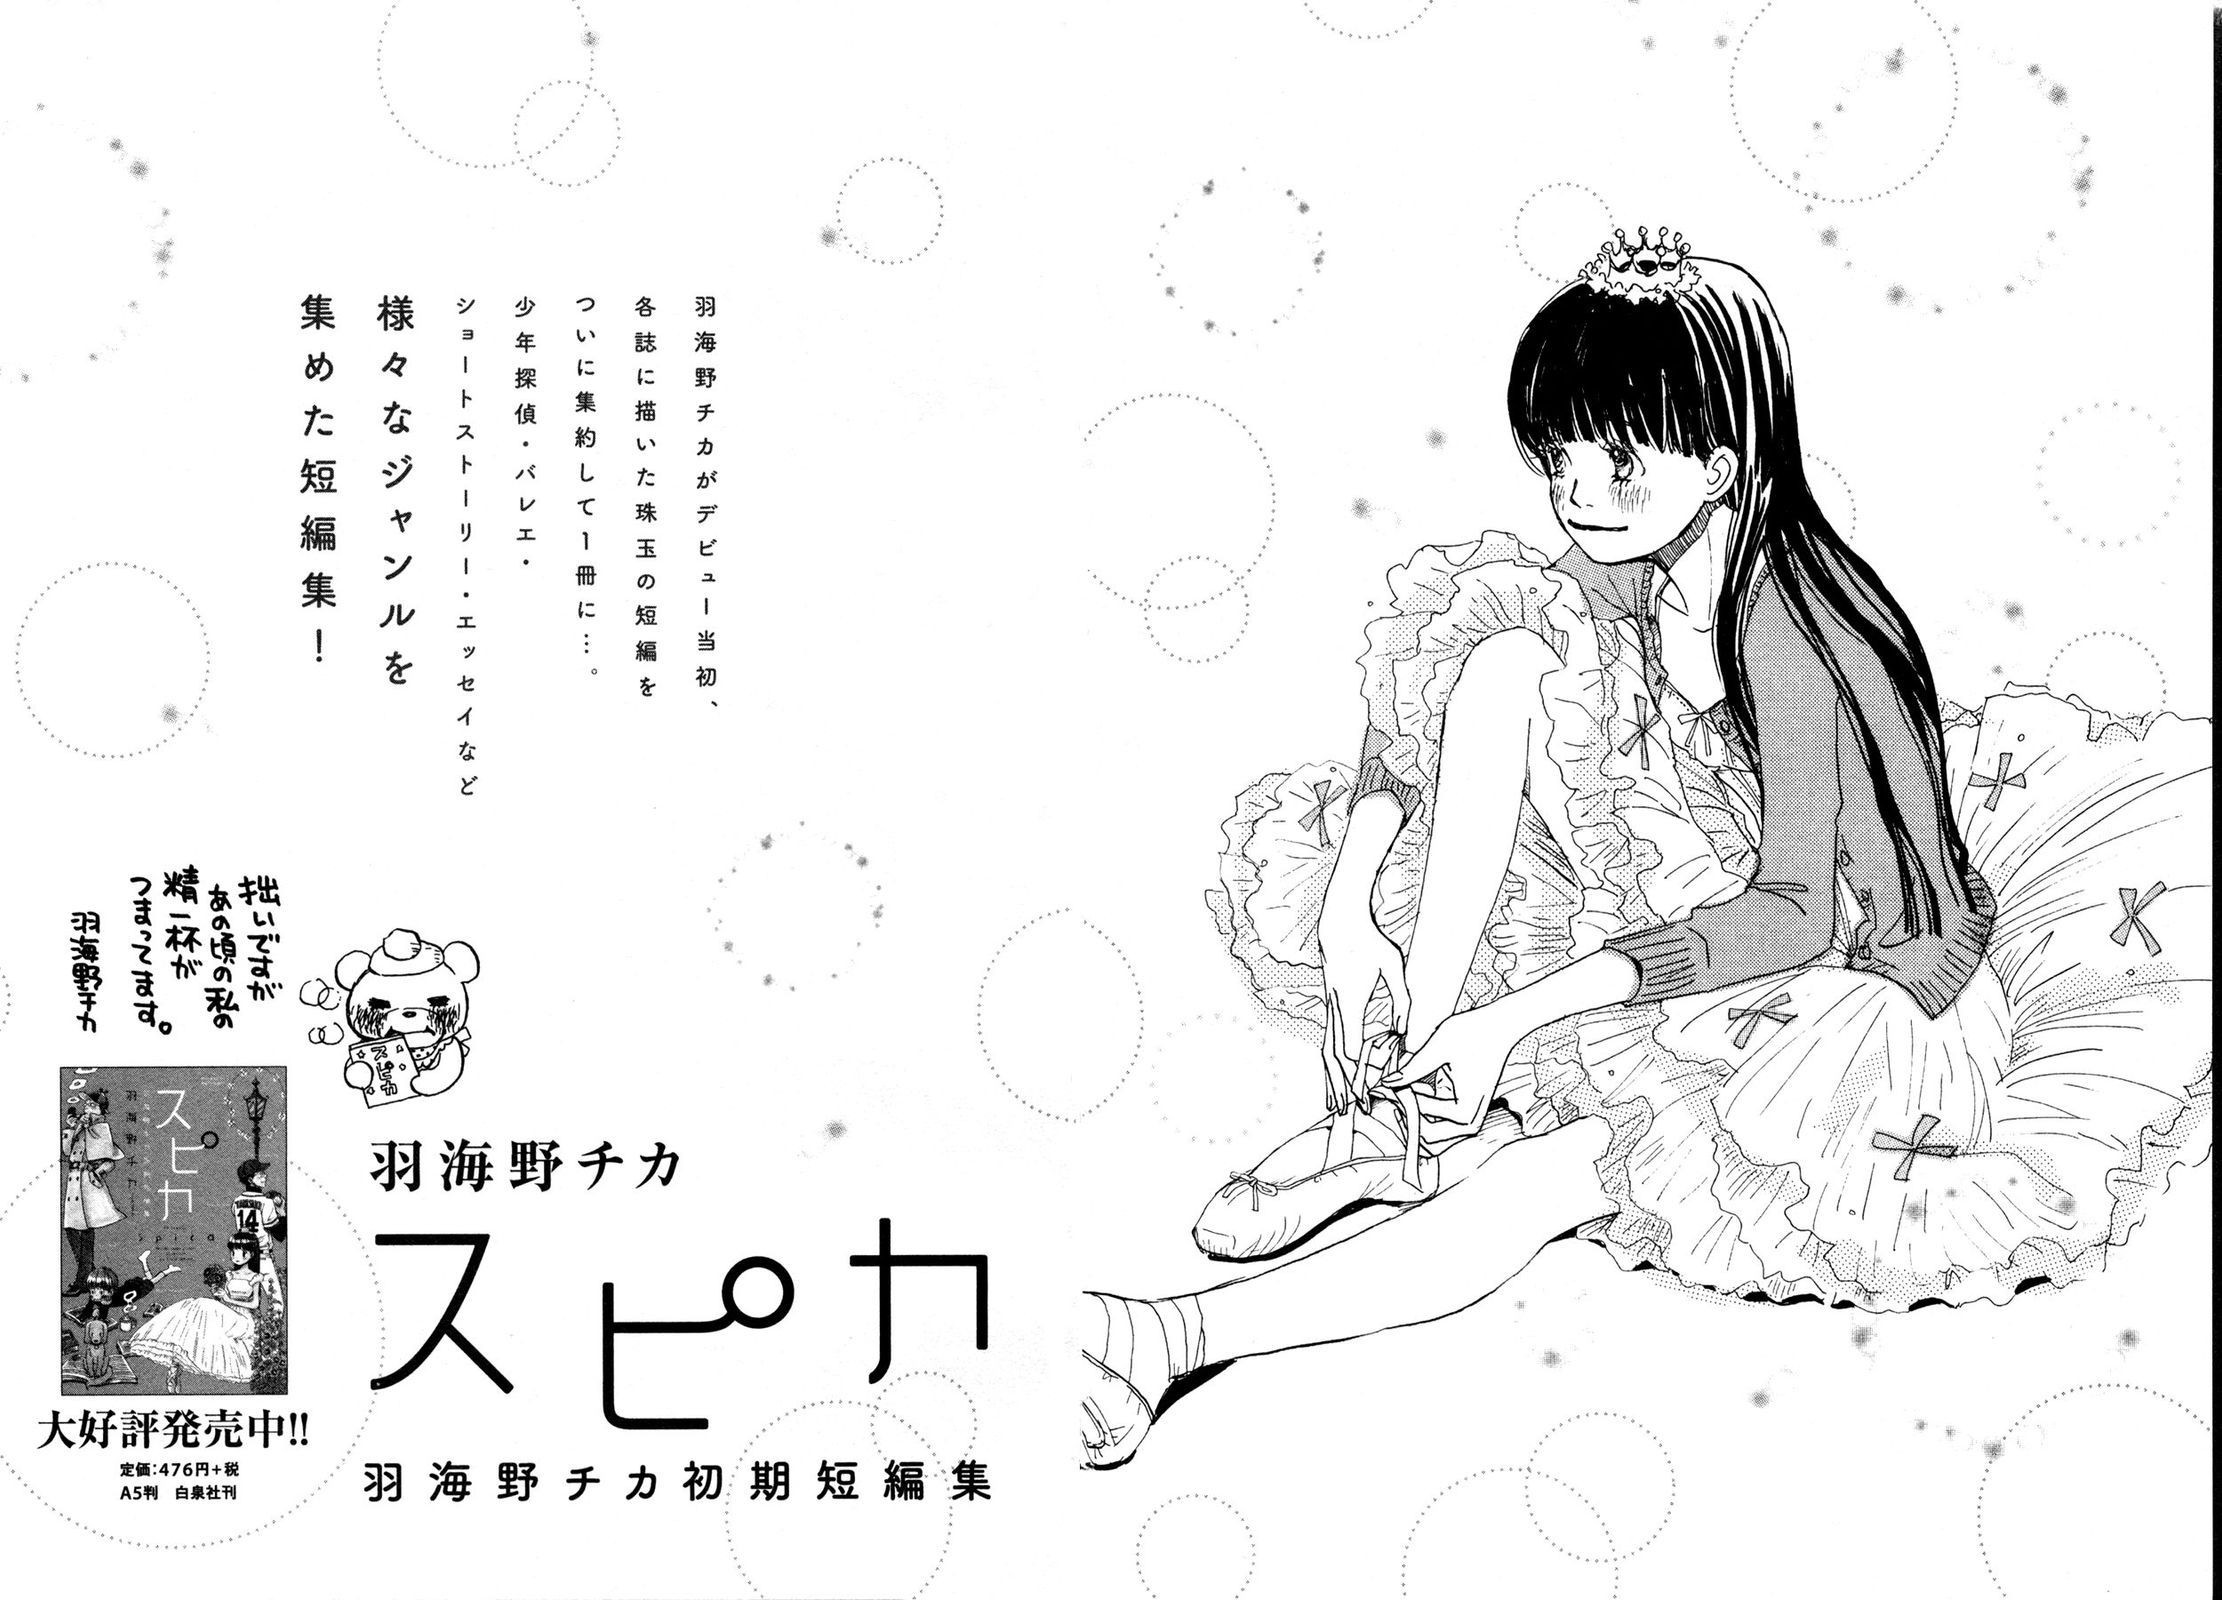 March Comes in Like a Lion, Chapter 139.5 Vol 13 Extra (EN) image 06